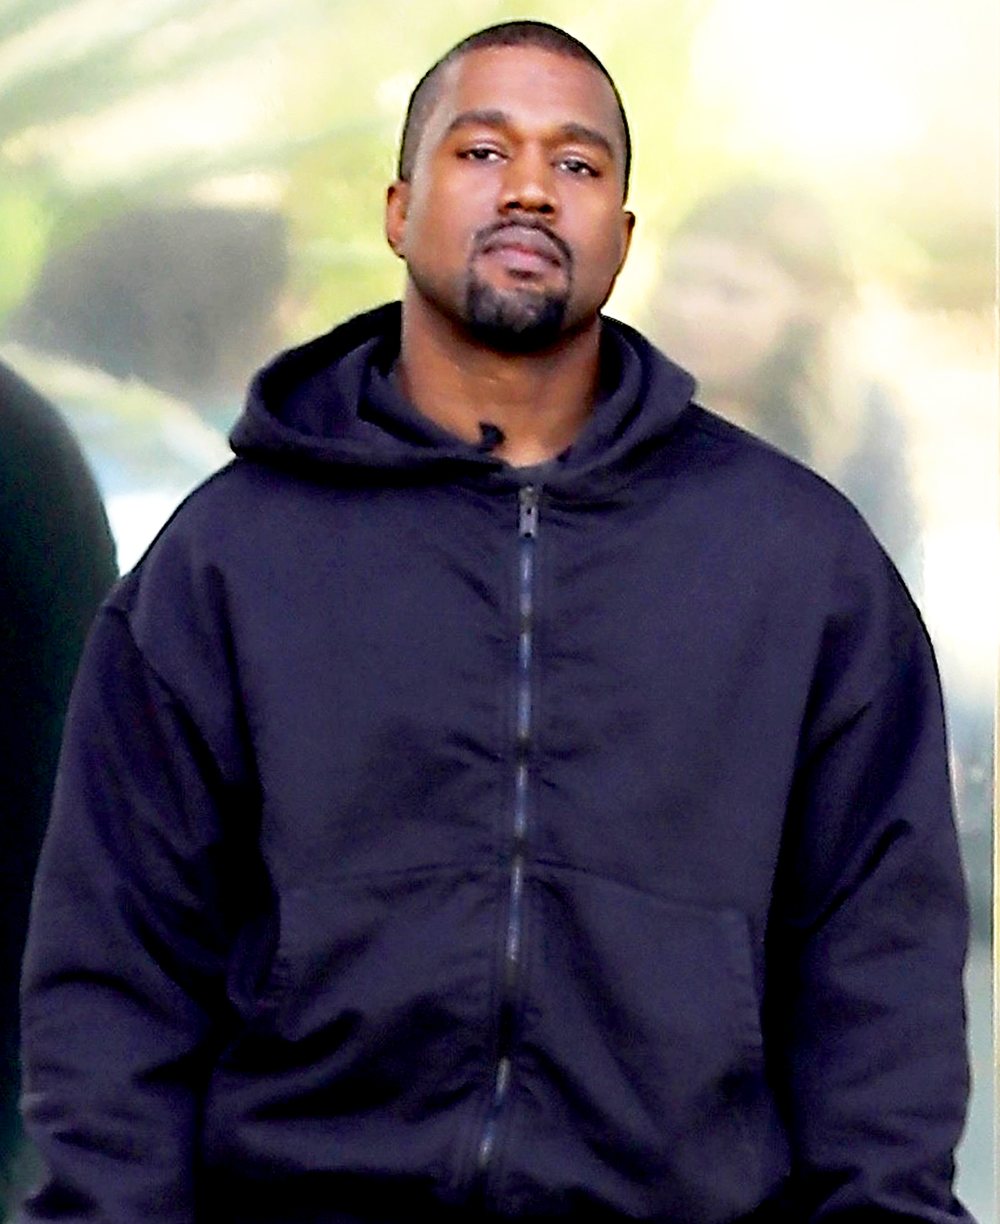 Kanye West arrives at his office on November 29, 2017 in Calabasas, California.